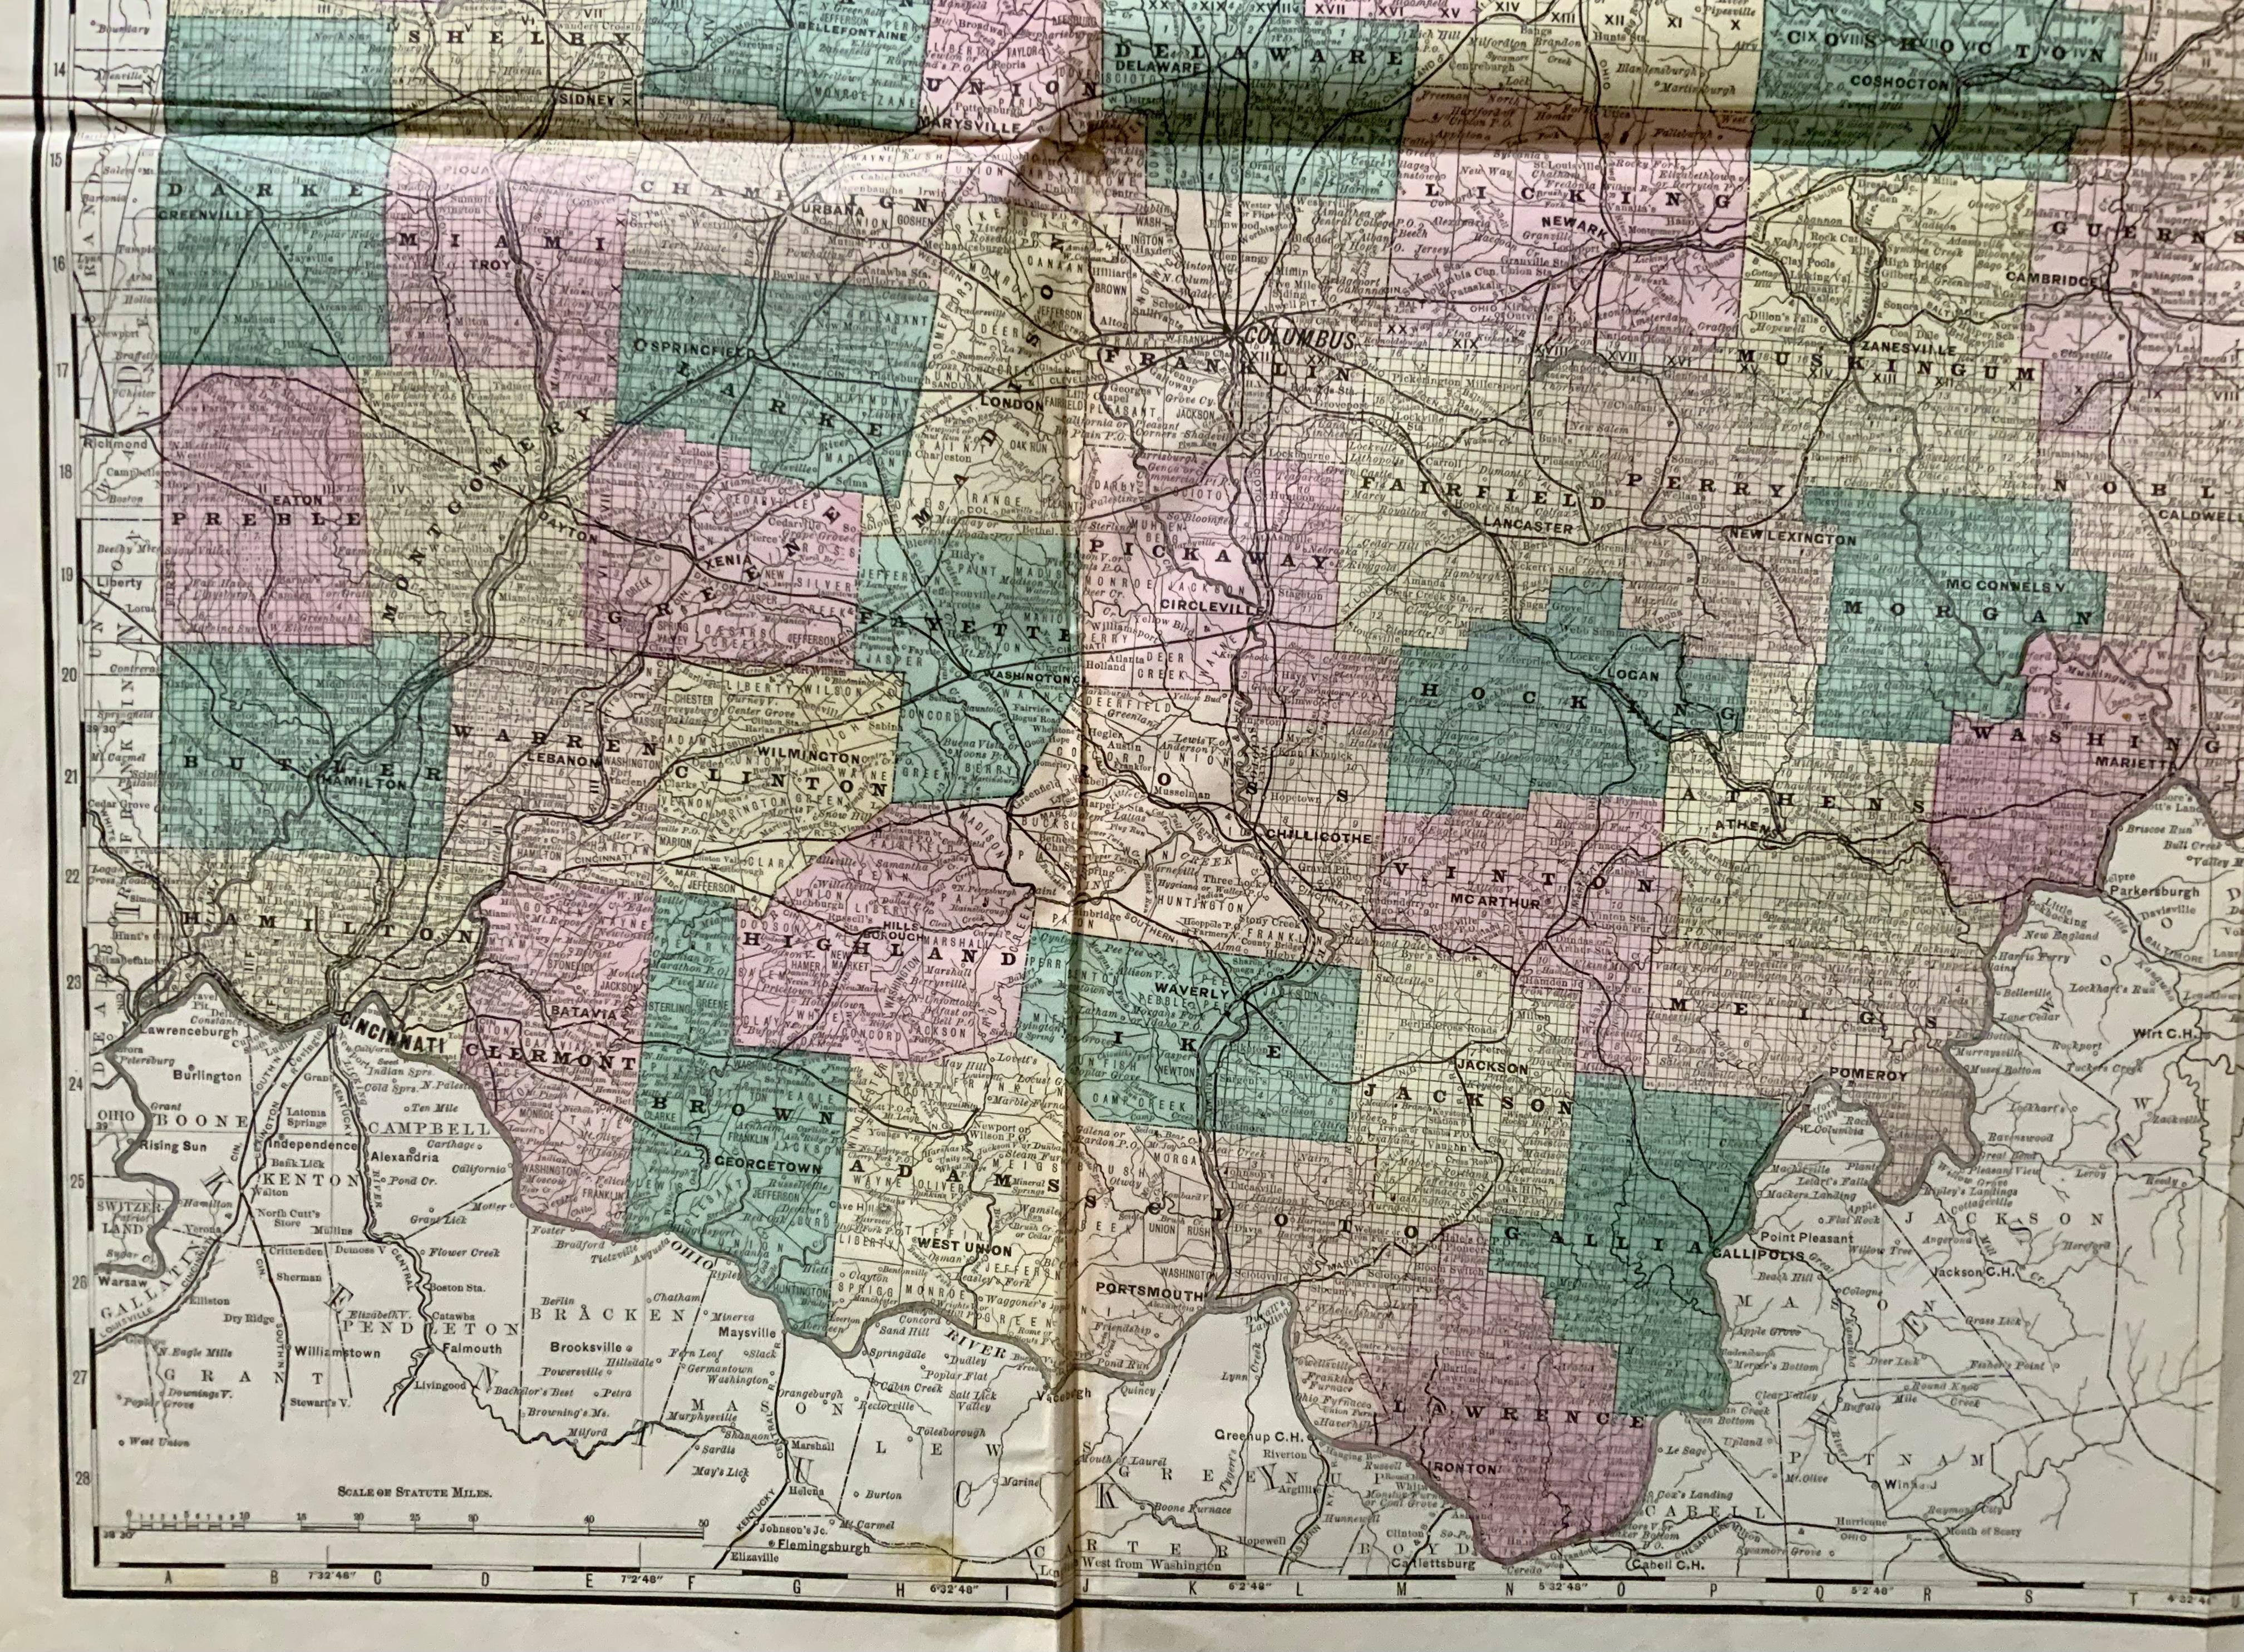 American Hardesty, Sectional & Township Map of Ohio, Very Large For Sale